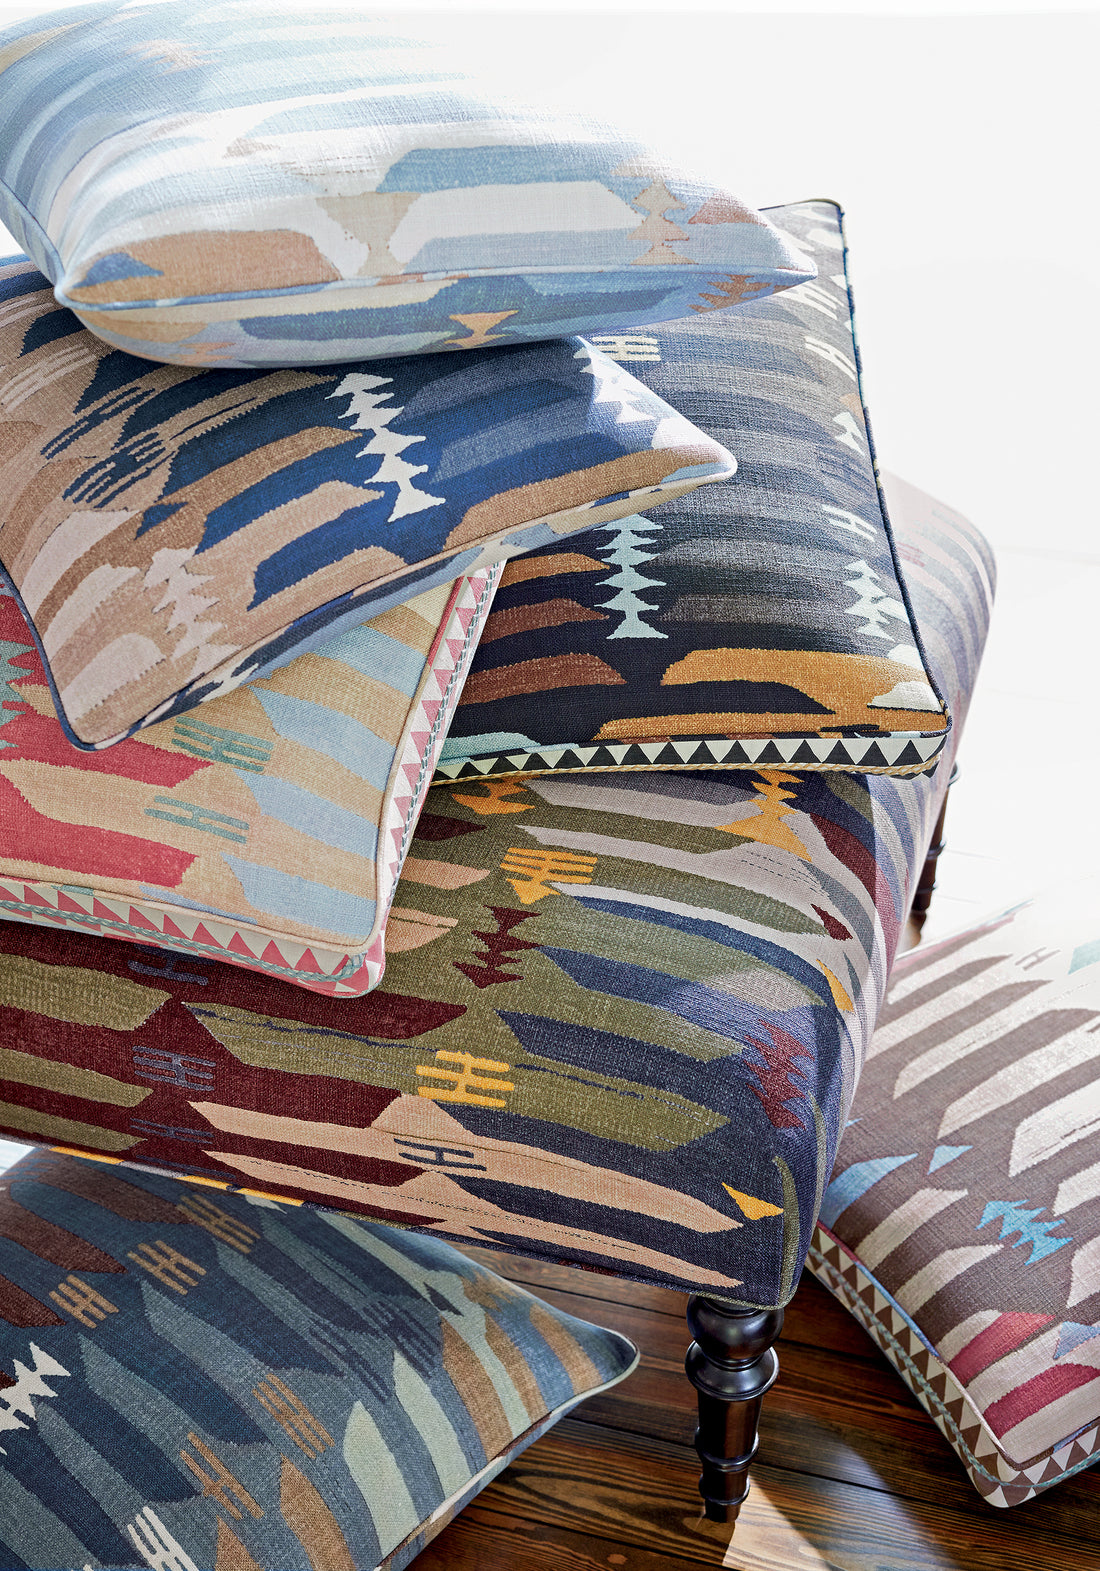 Baxter Ottoman and collection of Rio Grande printed fabric pillows featuring blue and beige color fabric - pattern number F913211 - by Thibaut in the Mesa collection